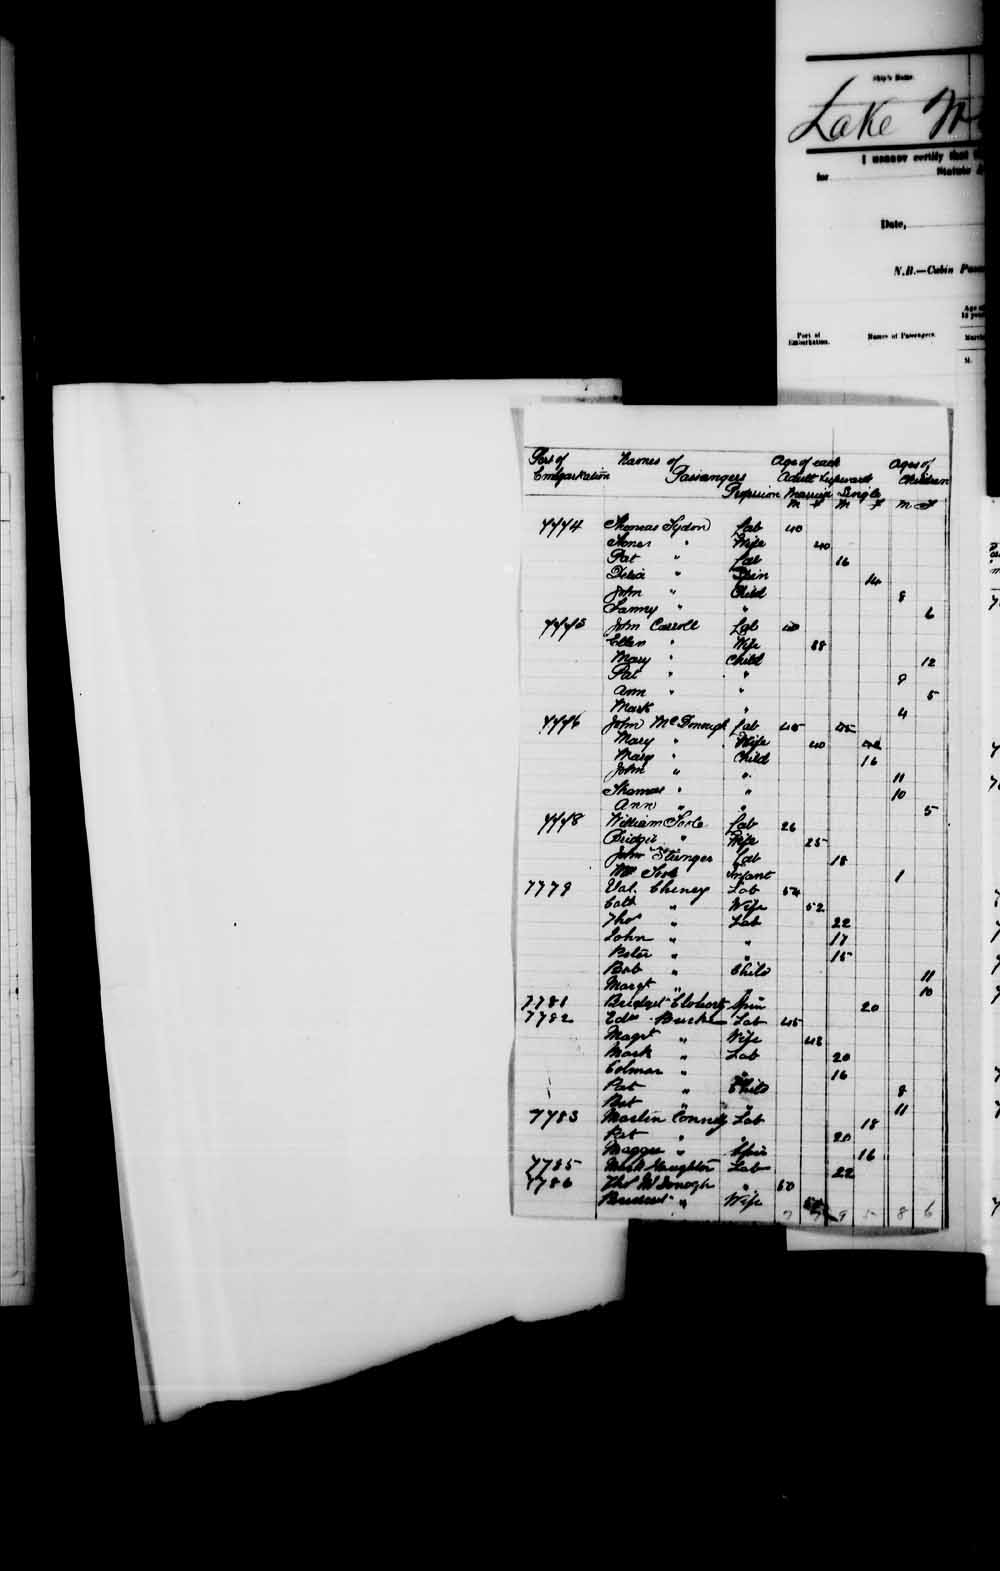 Digitized page of Passenger Lists for Image No.: e003541624